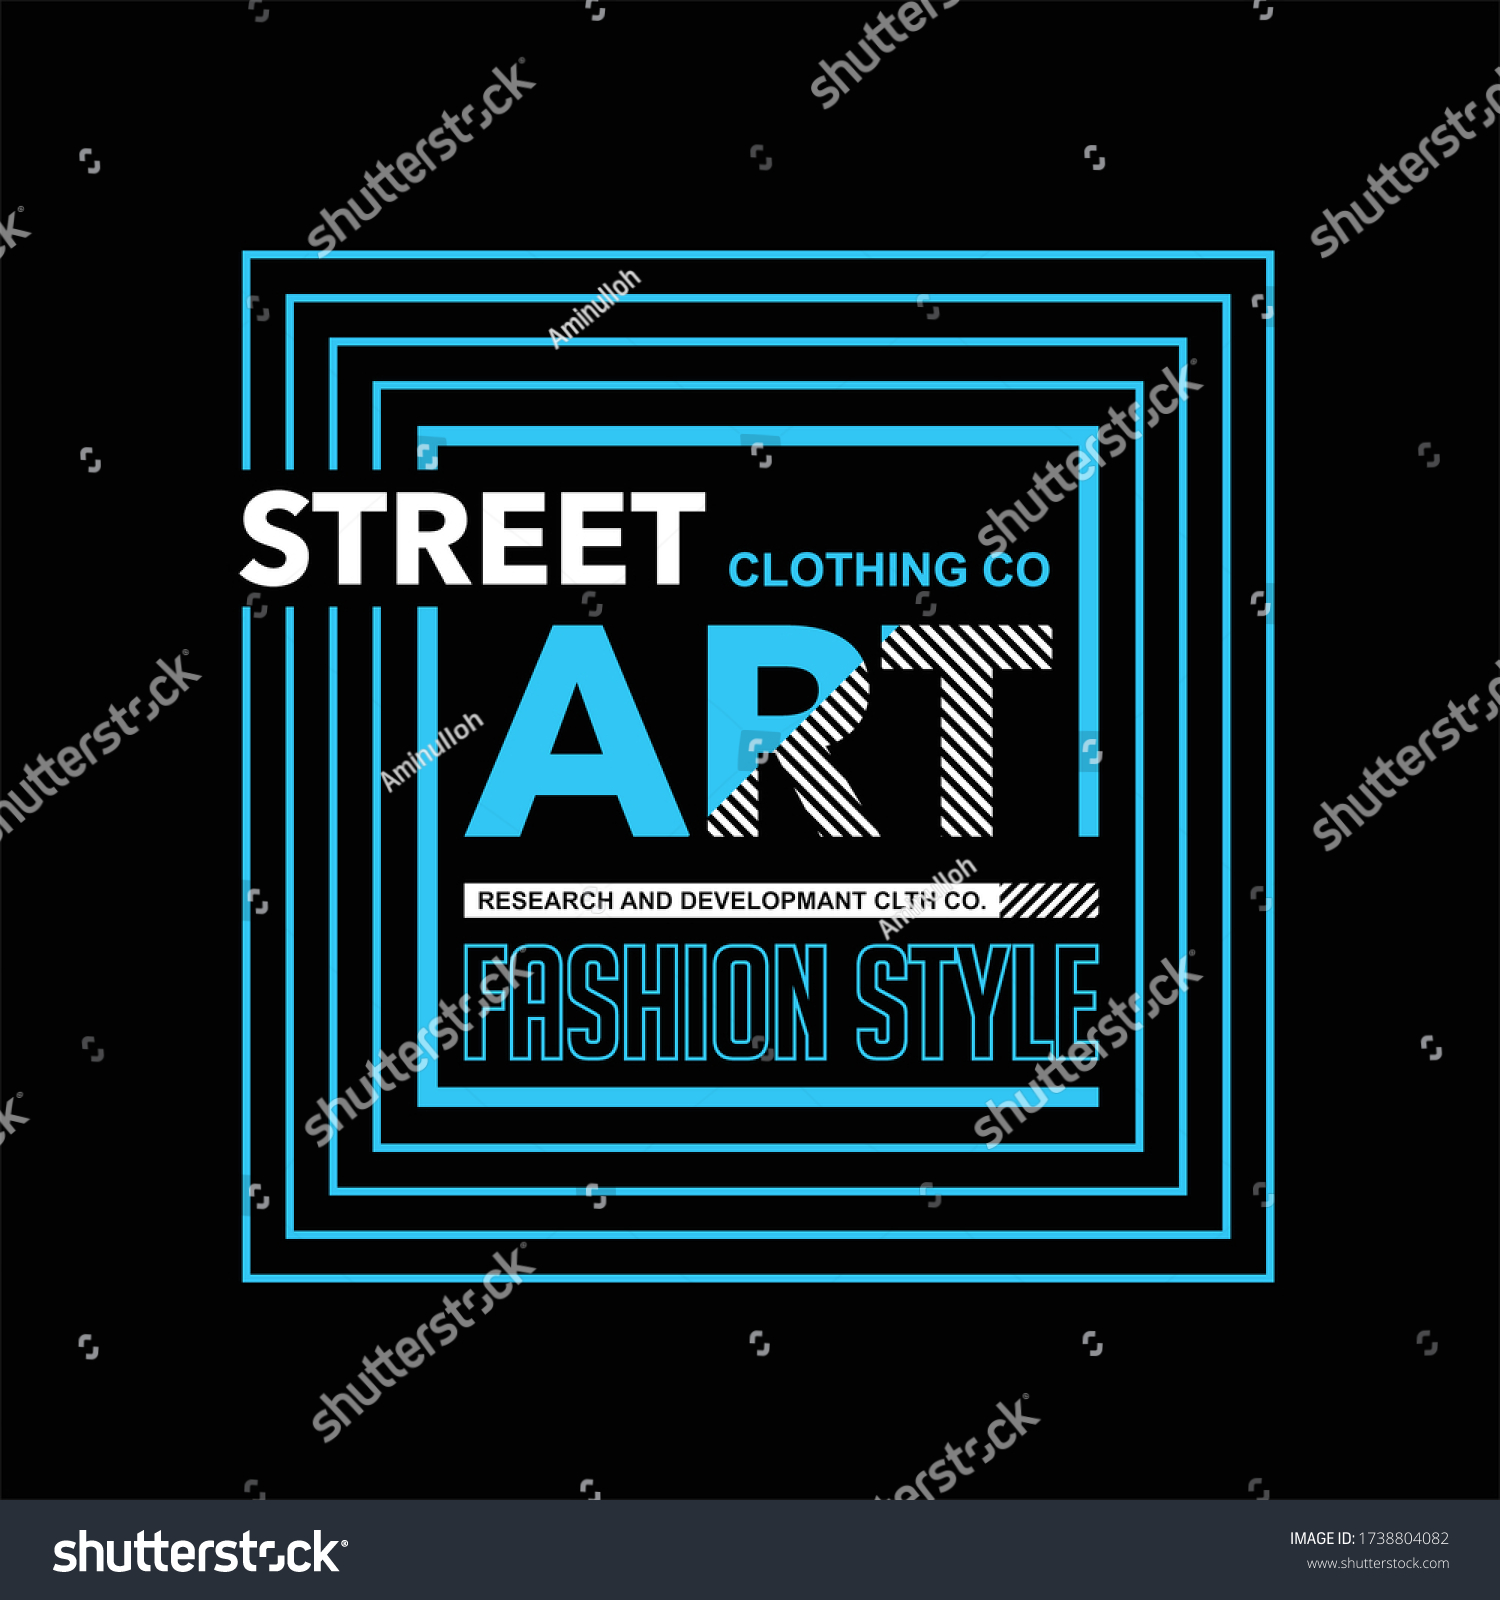 Street Art Clothing Co Fashion Style Stock Vector (Royalty Free ...